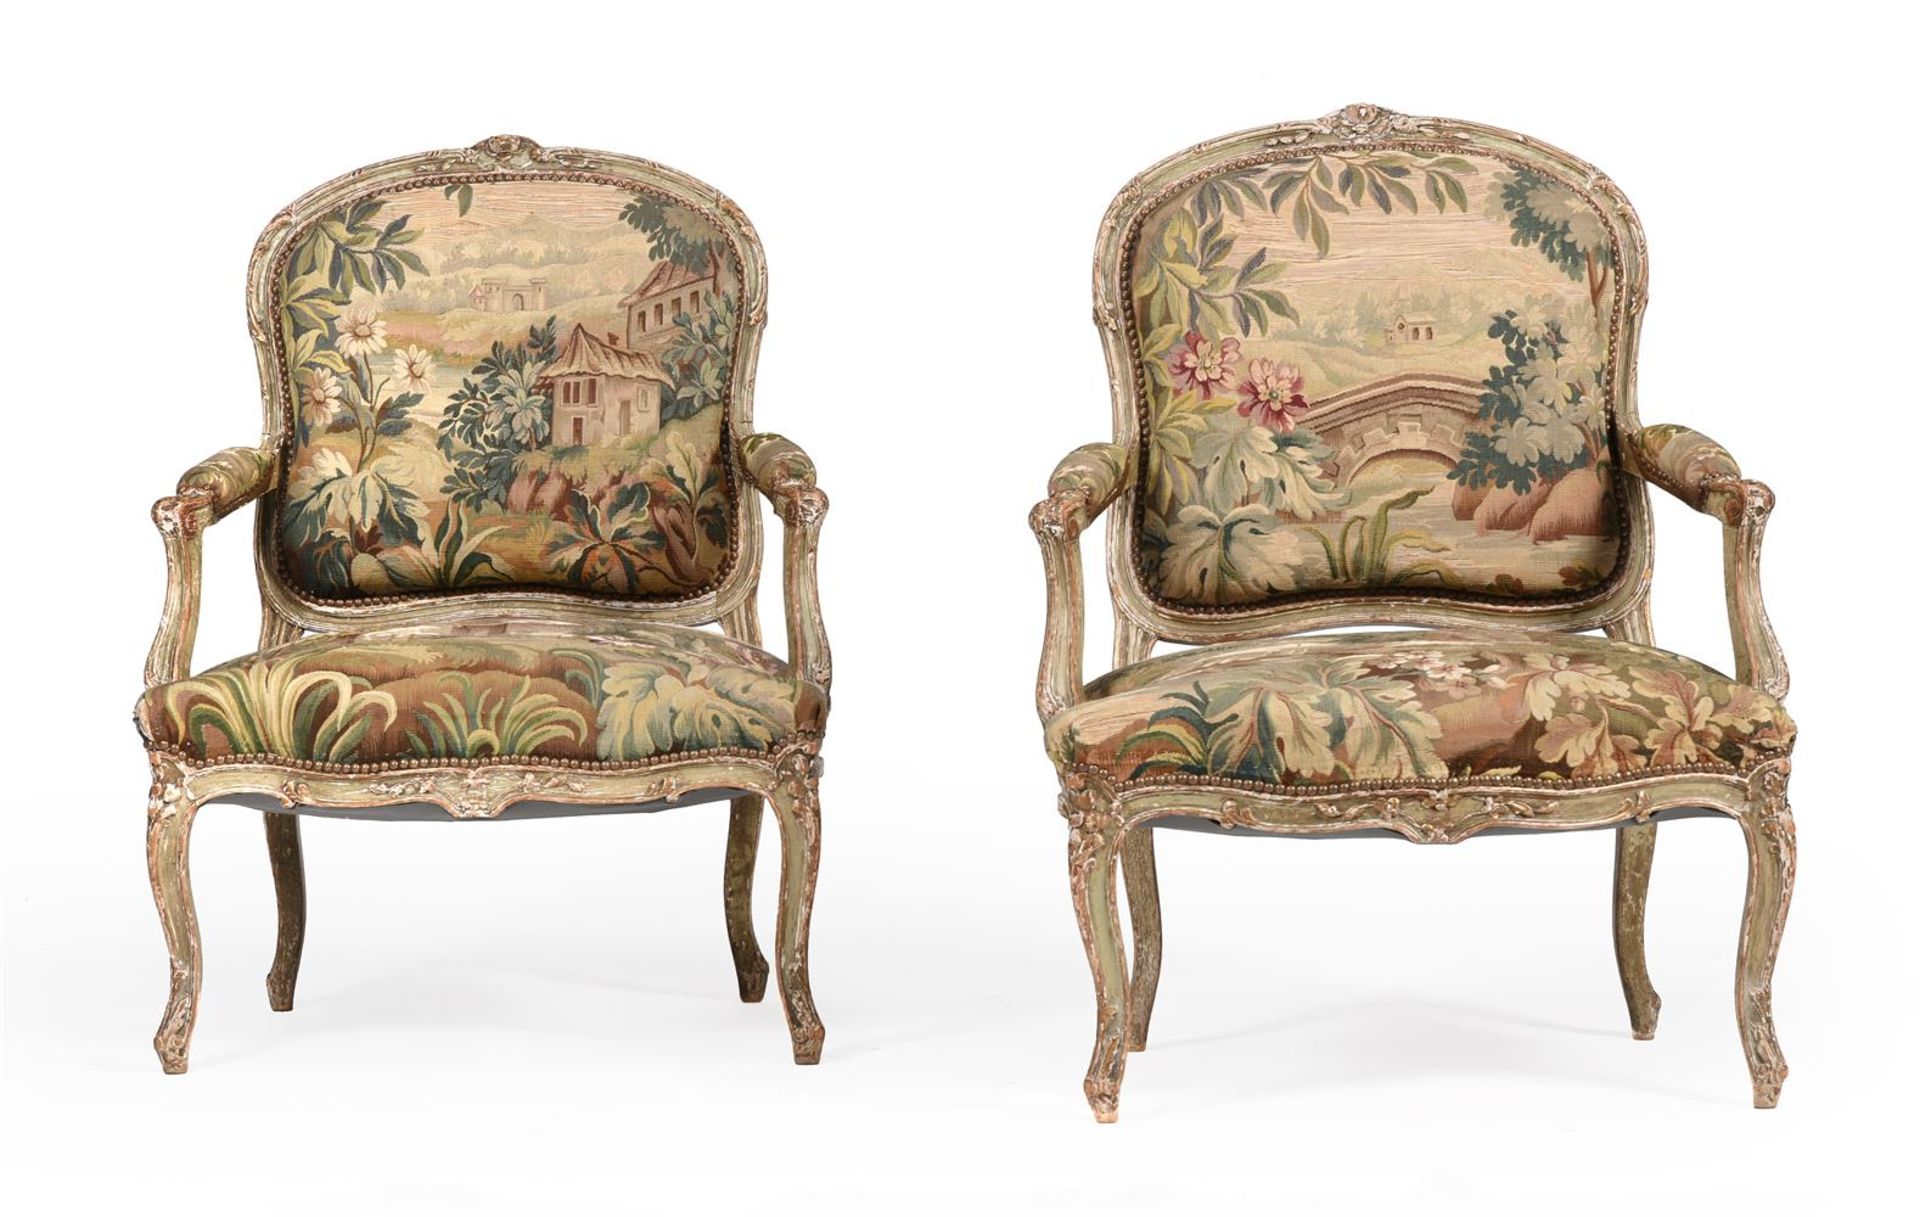 A PAIR OF FRENCH PAINTED AND PARCEL GILT FAUTEUILS - Image 2 of 7